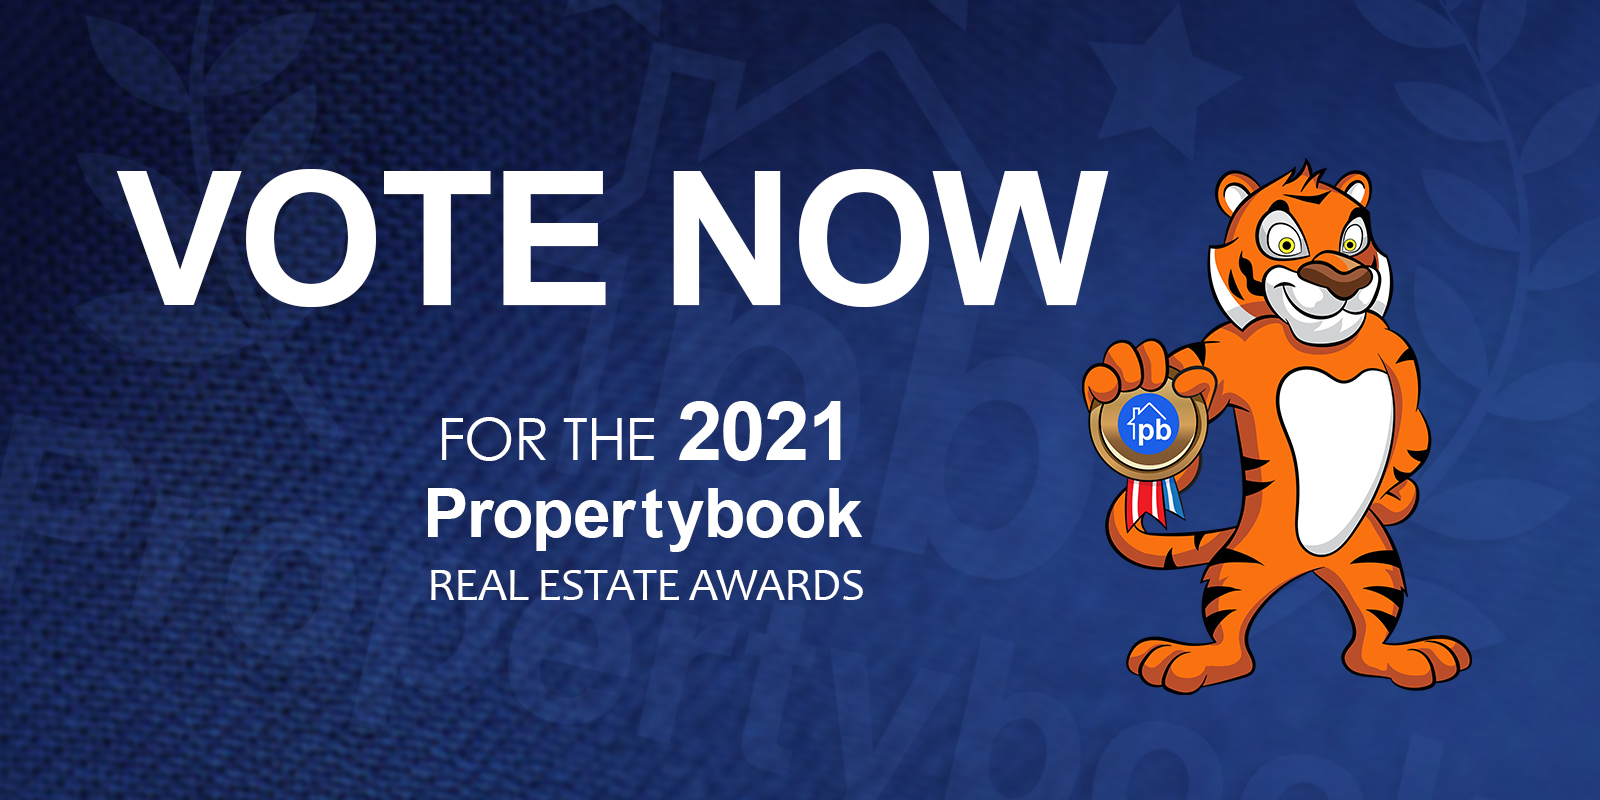 Vote Now for the 2021 Propertybook Real Estate Awards